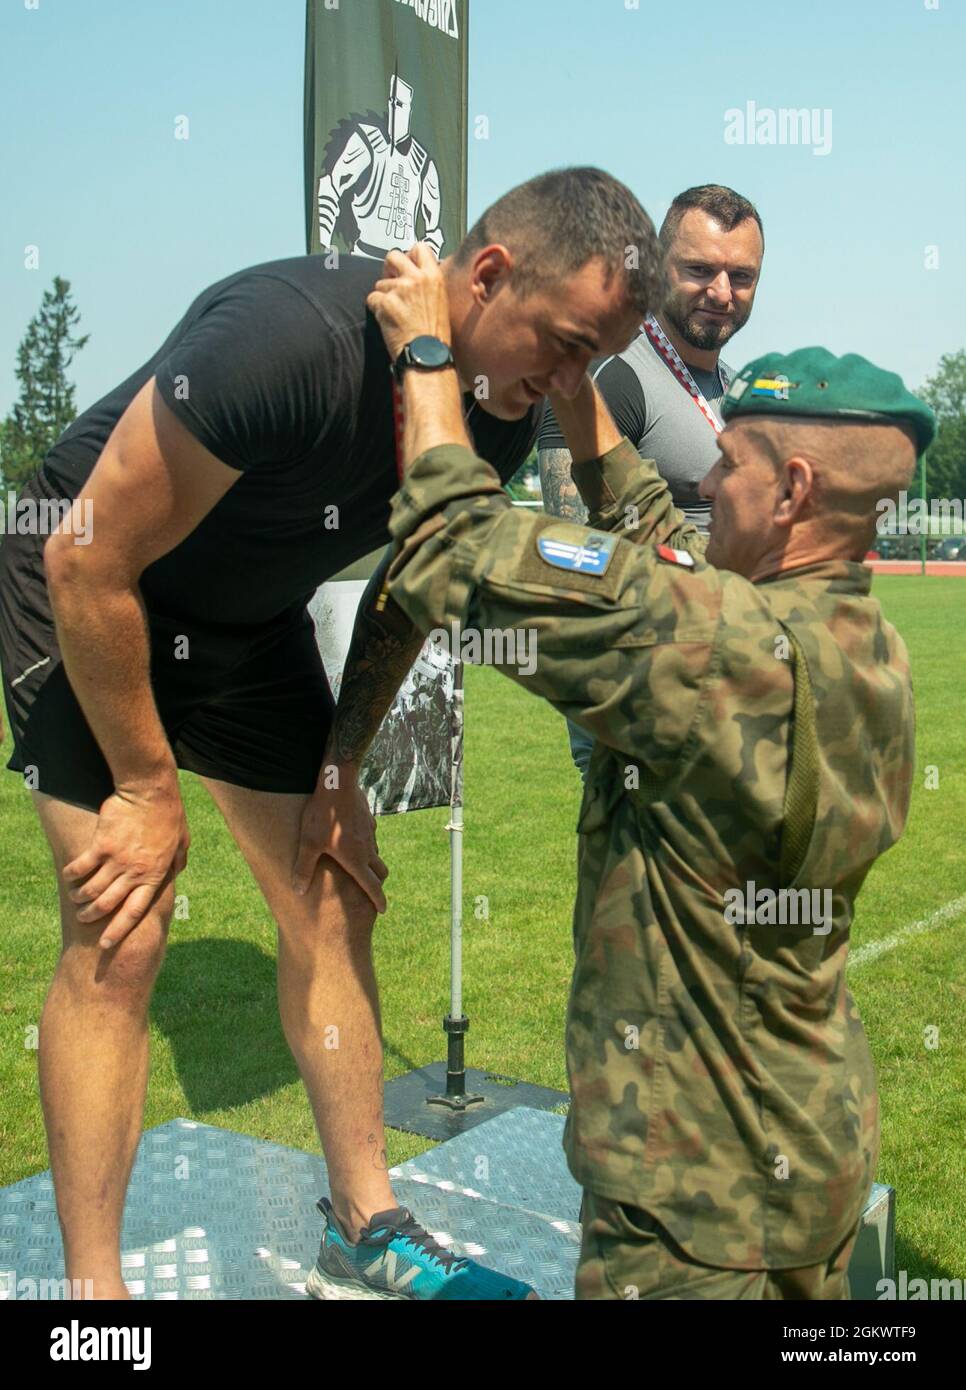 Polish Land Forces, 15th Mechanized Brigade Commander, Brig. Gen. Bogdan Rycerski, presents the javelin first place medal to British Army Lcpl. Peter Arnold at Stadion Miejski MOSIR in Giżycko, Poland July 13, 2021. Battle Group Poland had 40 competitors representing the U.S. Army, British Army and Romanian Land Forces compete in the track and field event, which included 100 meter, 400 meter, 800 meter and 4 X 400 meter races as well as, javelin throw, shot put, and long jump competitions. The inaugral multinational track and field event was held to celebrate Polish Land Forces 15th Mechanized Stock Photo